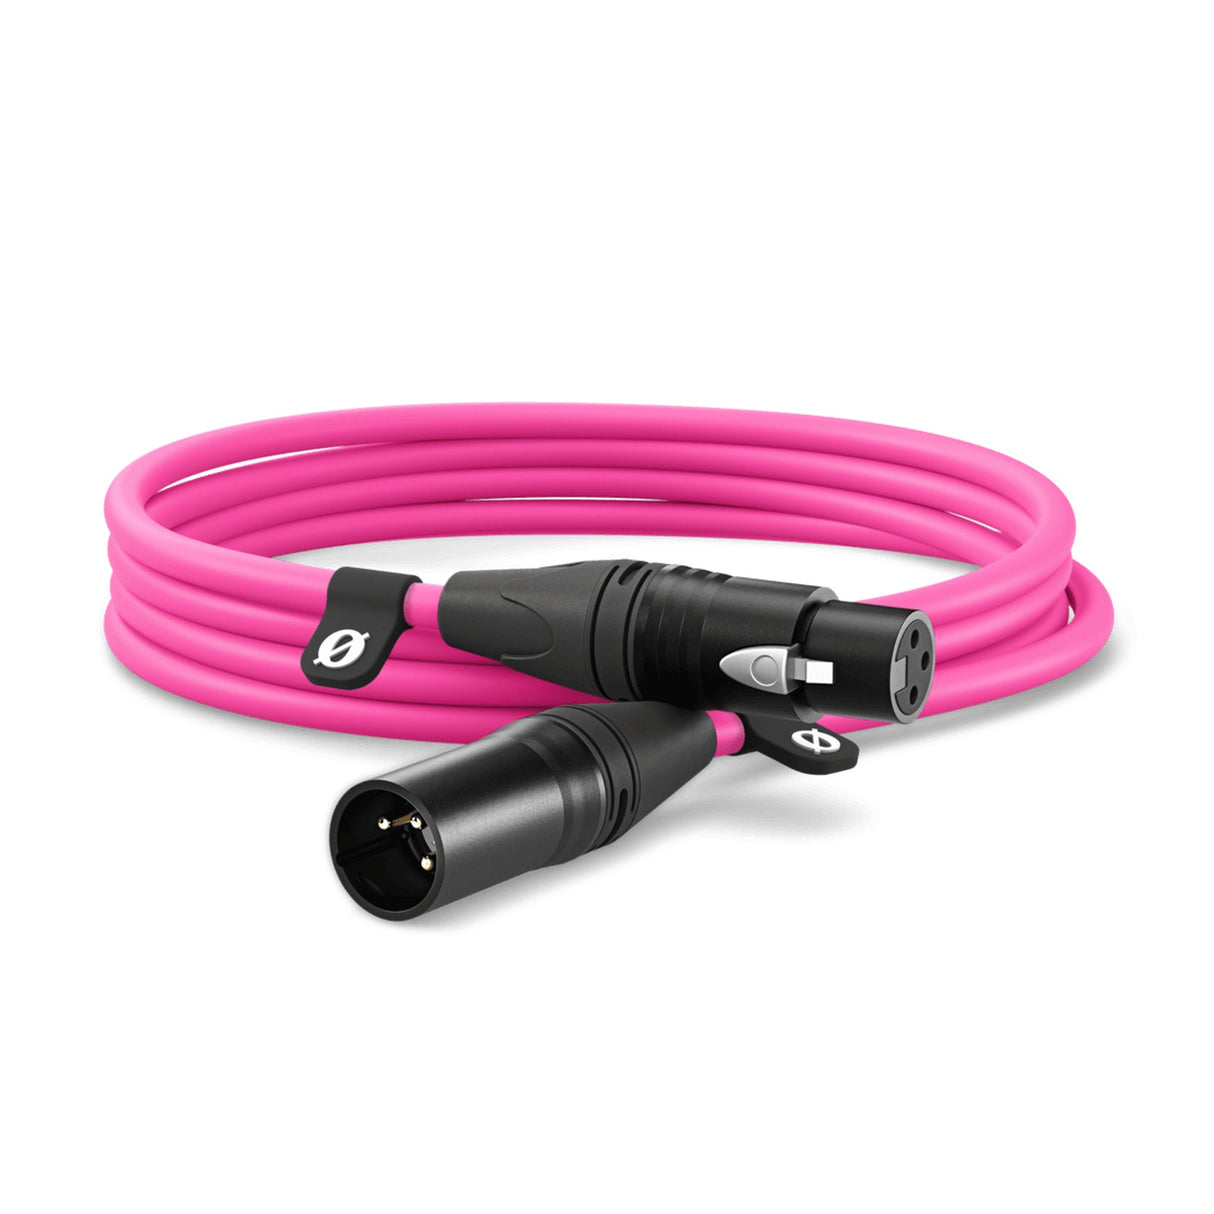 RODE XLR-3 3-Foot Premium Male to Female XLR Cable, Pink